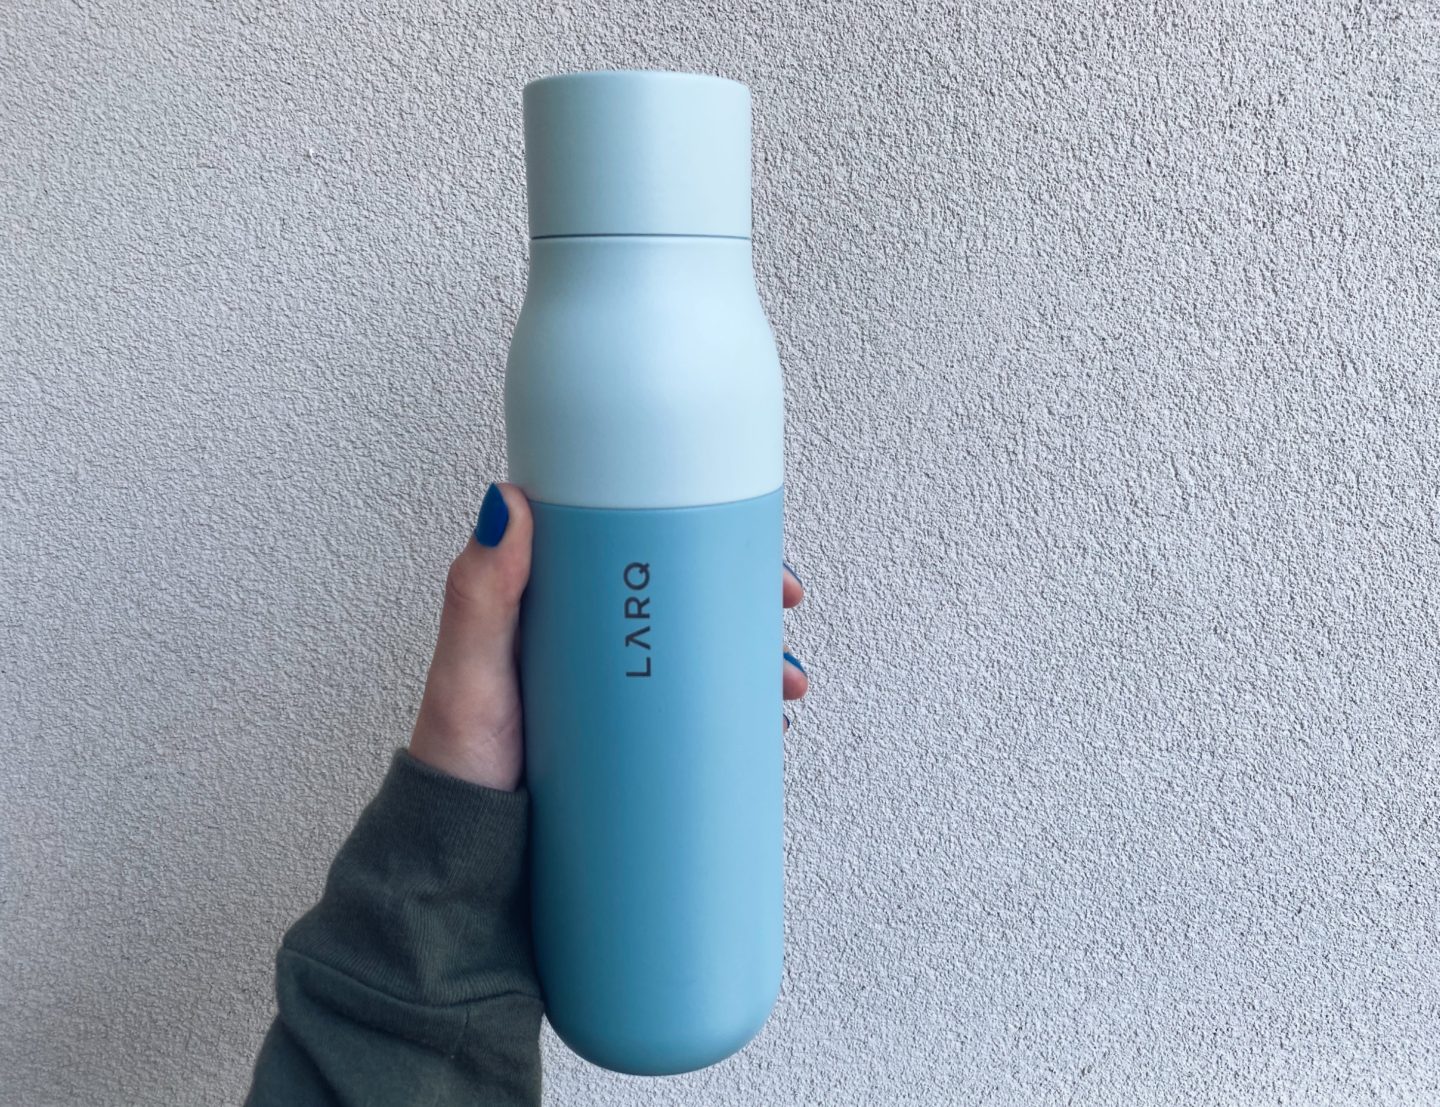 Meet LARQ! The World’s First Self-Cleaning Water Bottle